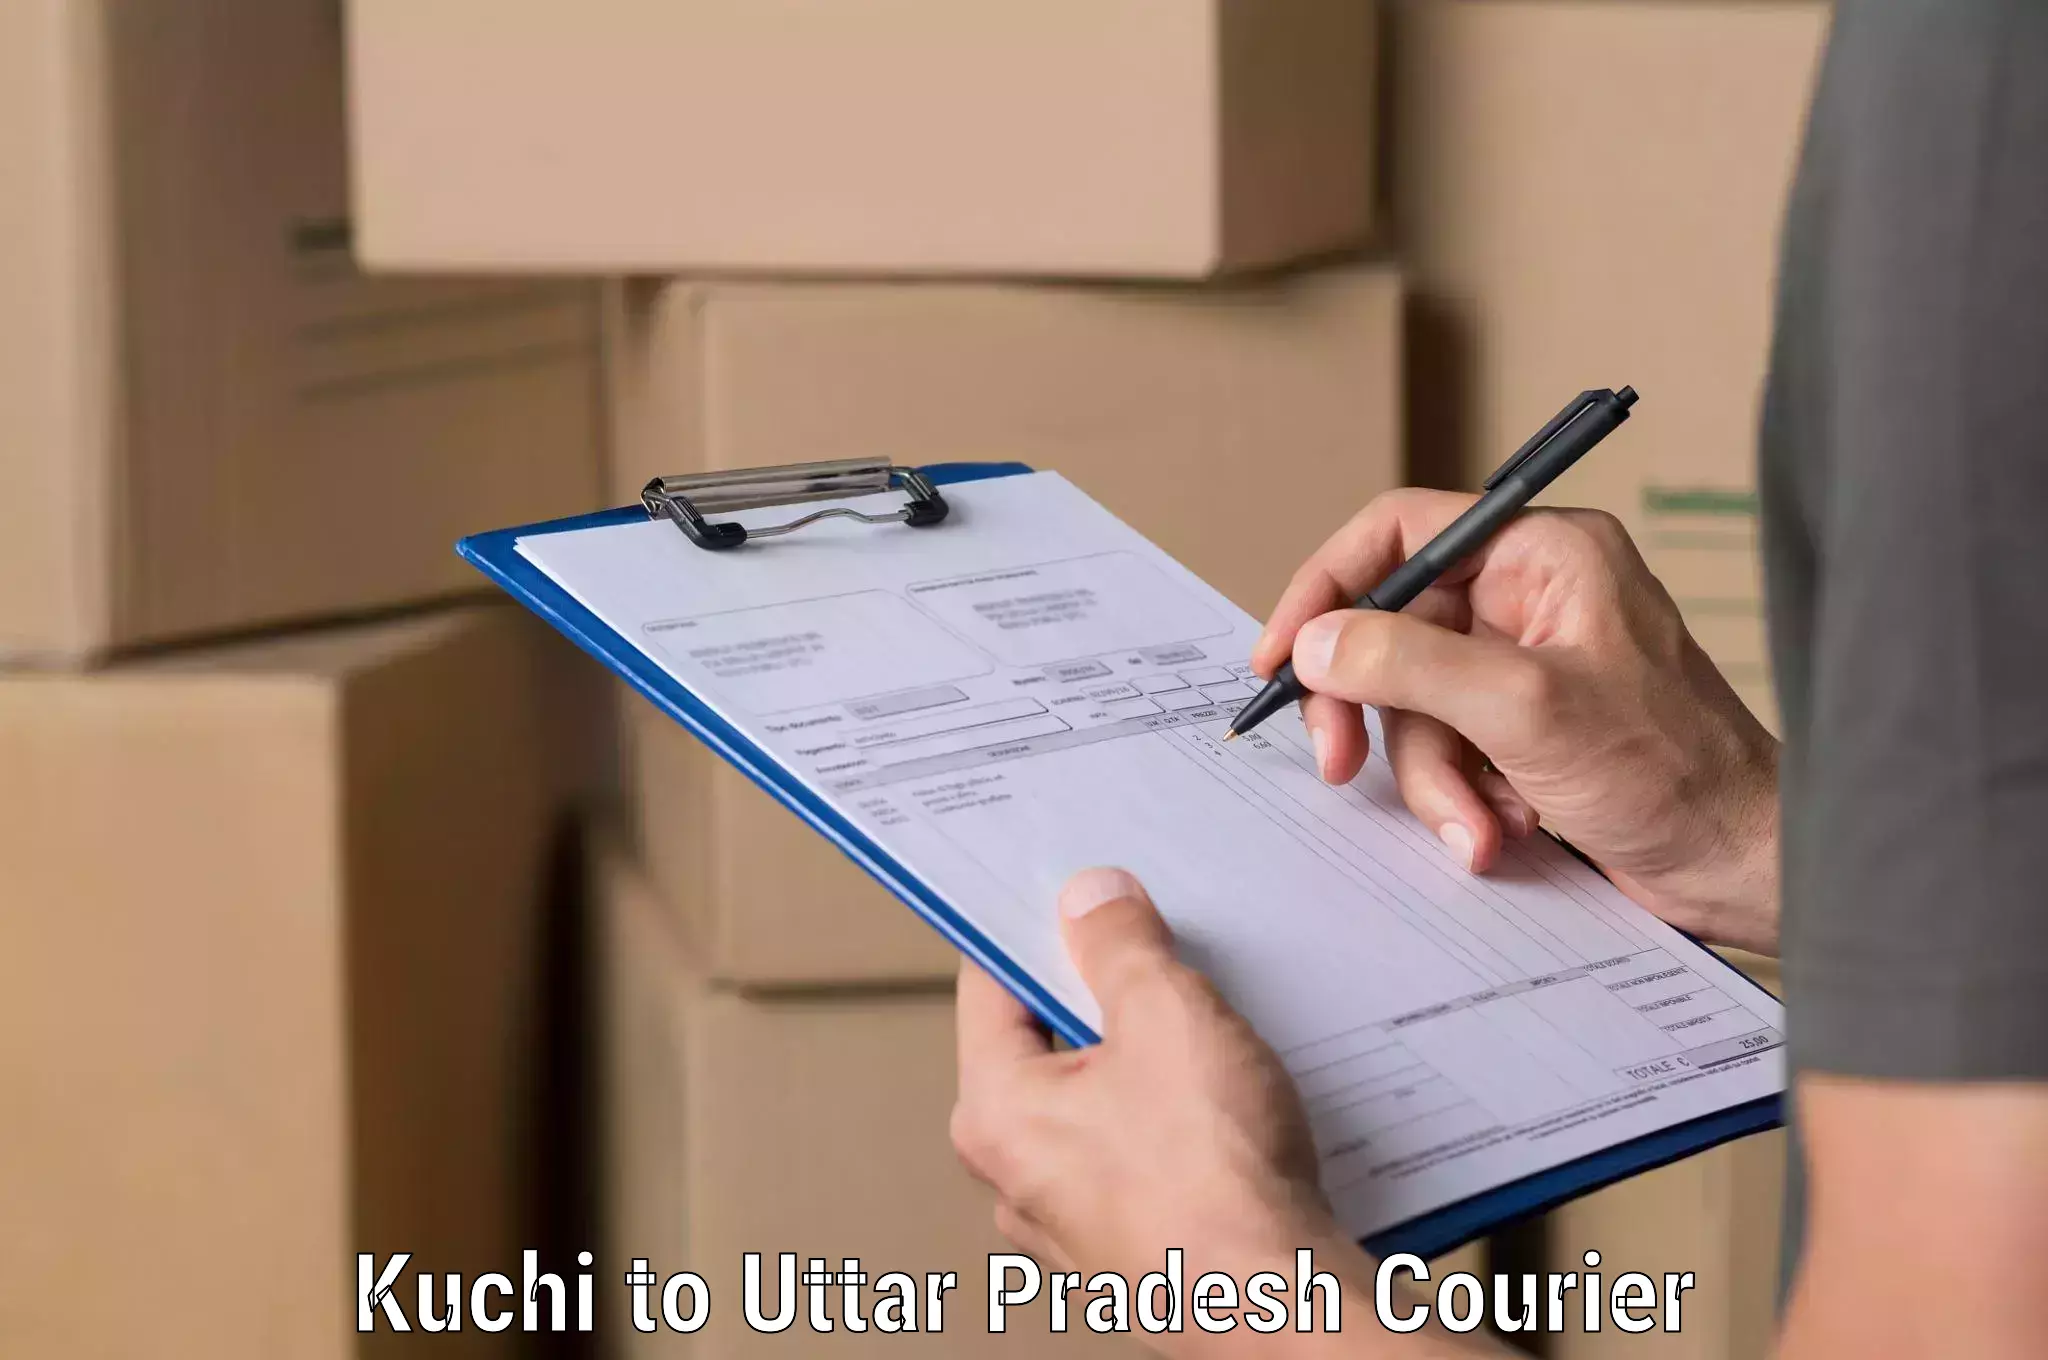 On-call courier service Kuchi to Salempur